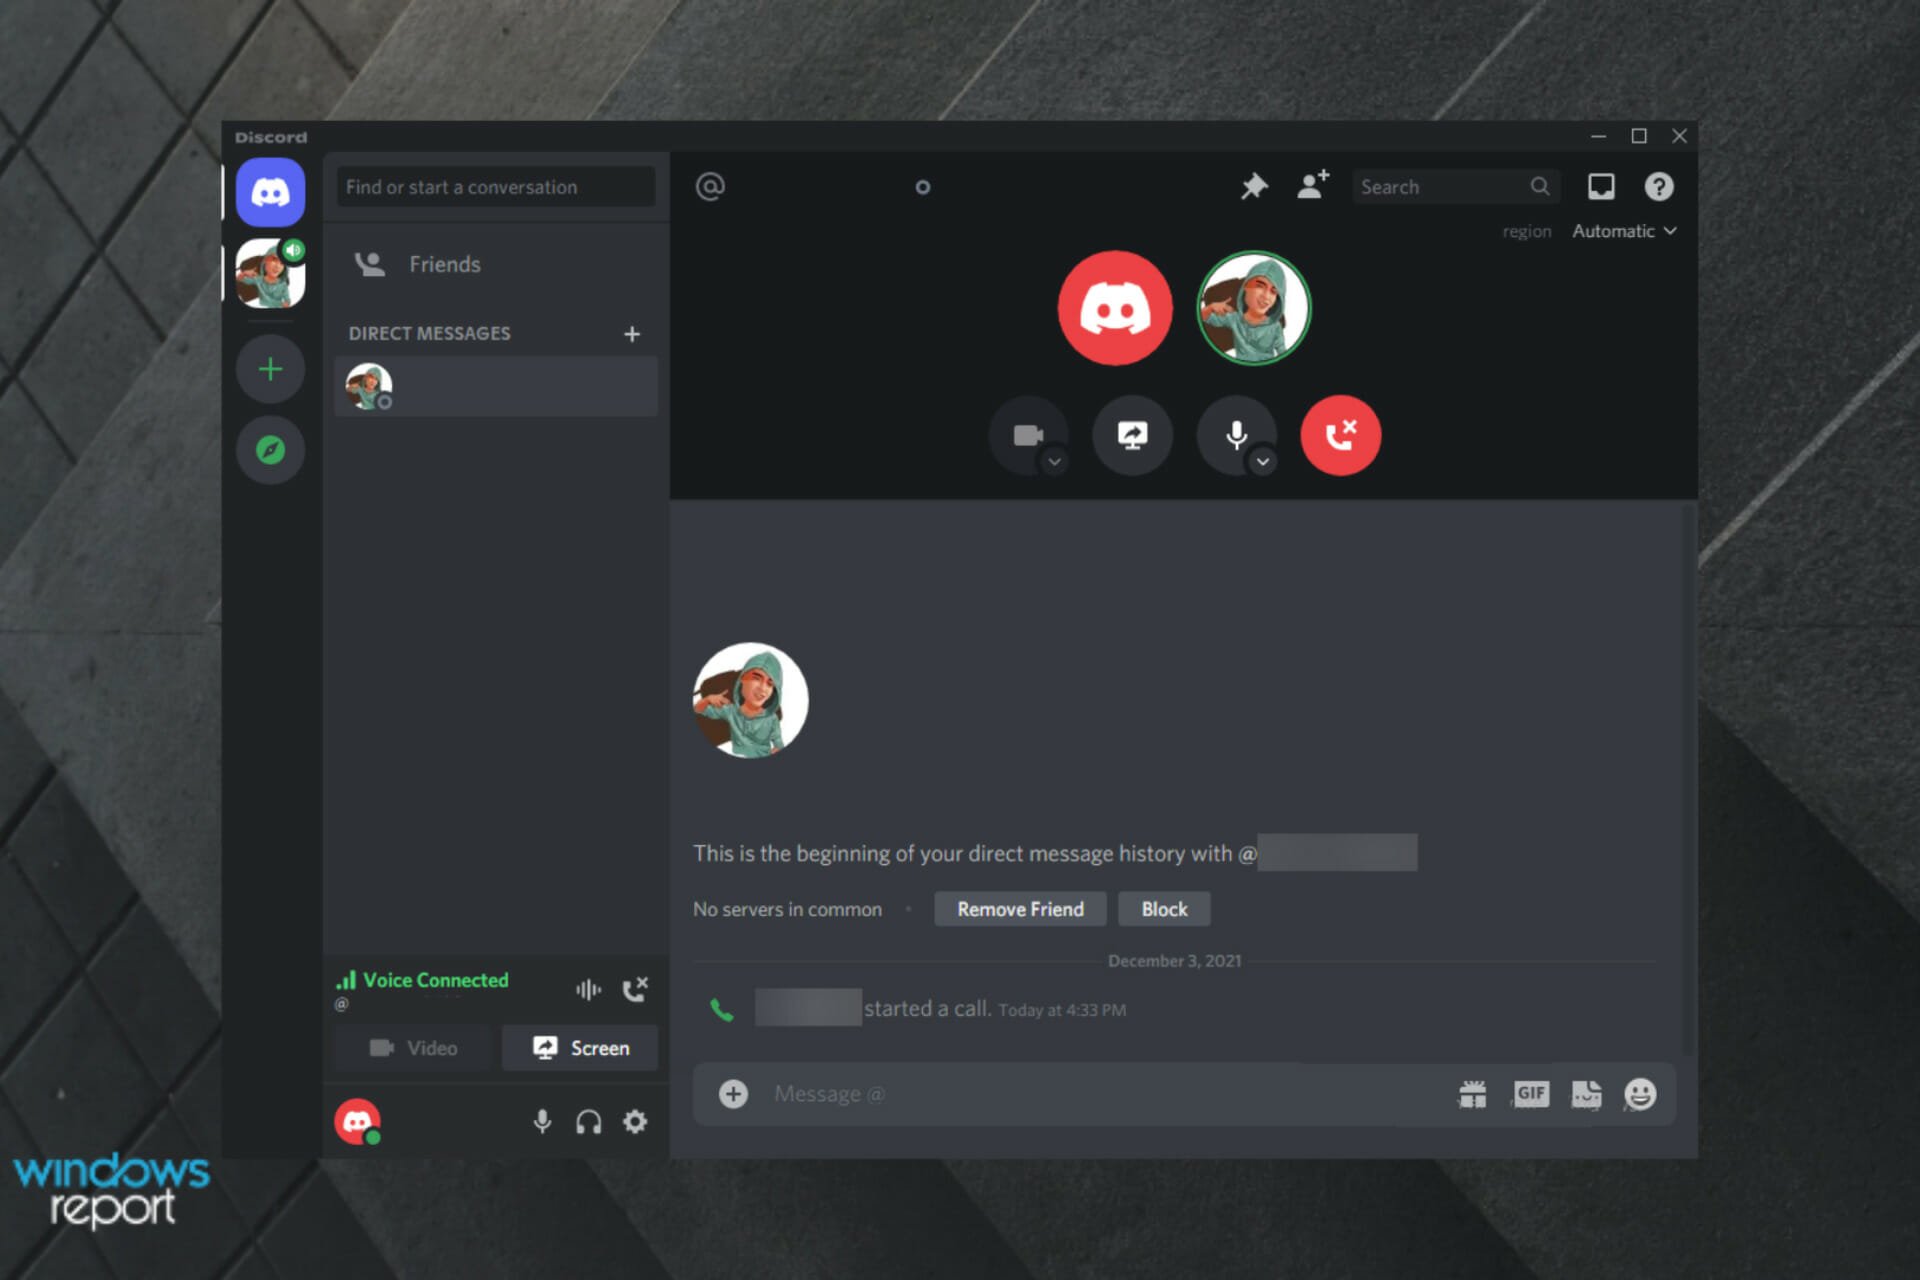 Your camera is not working on Discord? Try these solutions